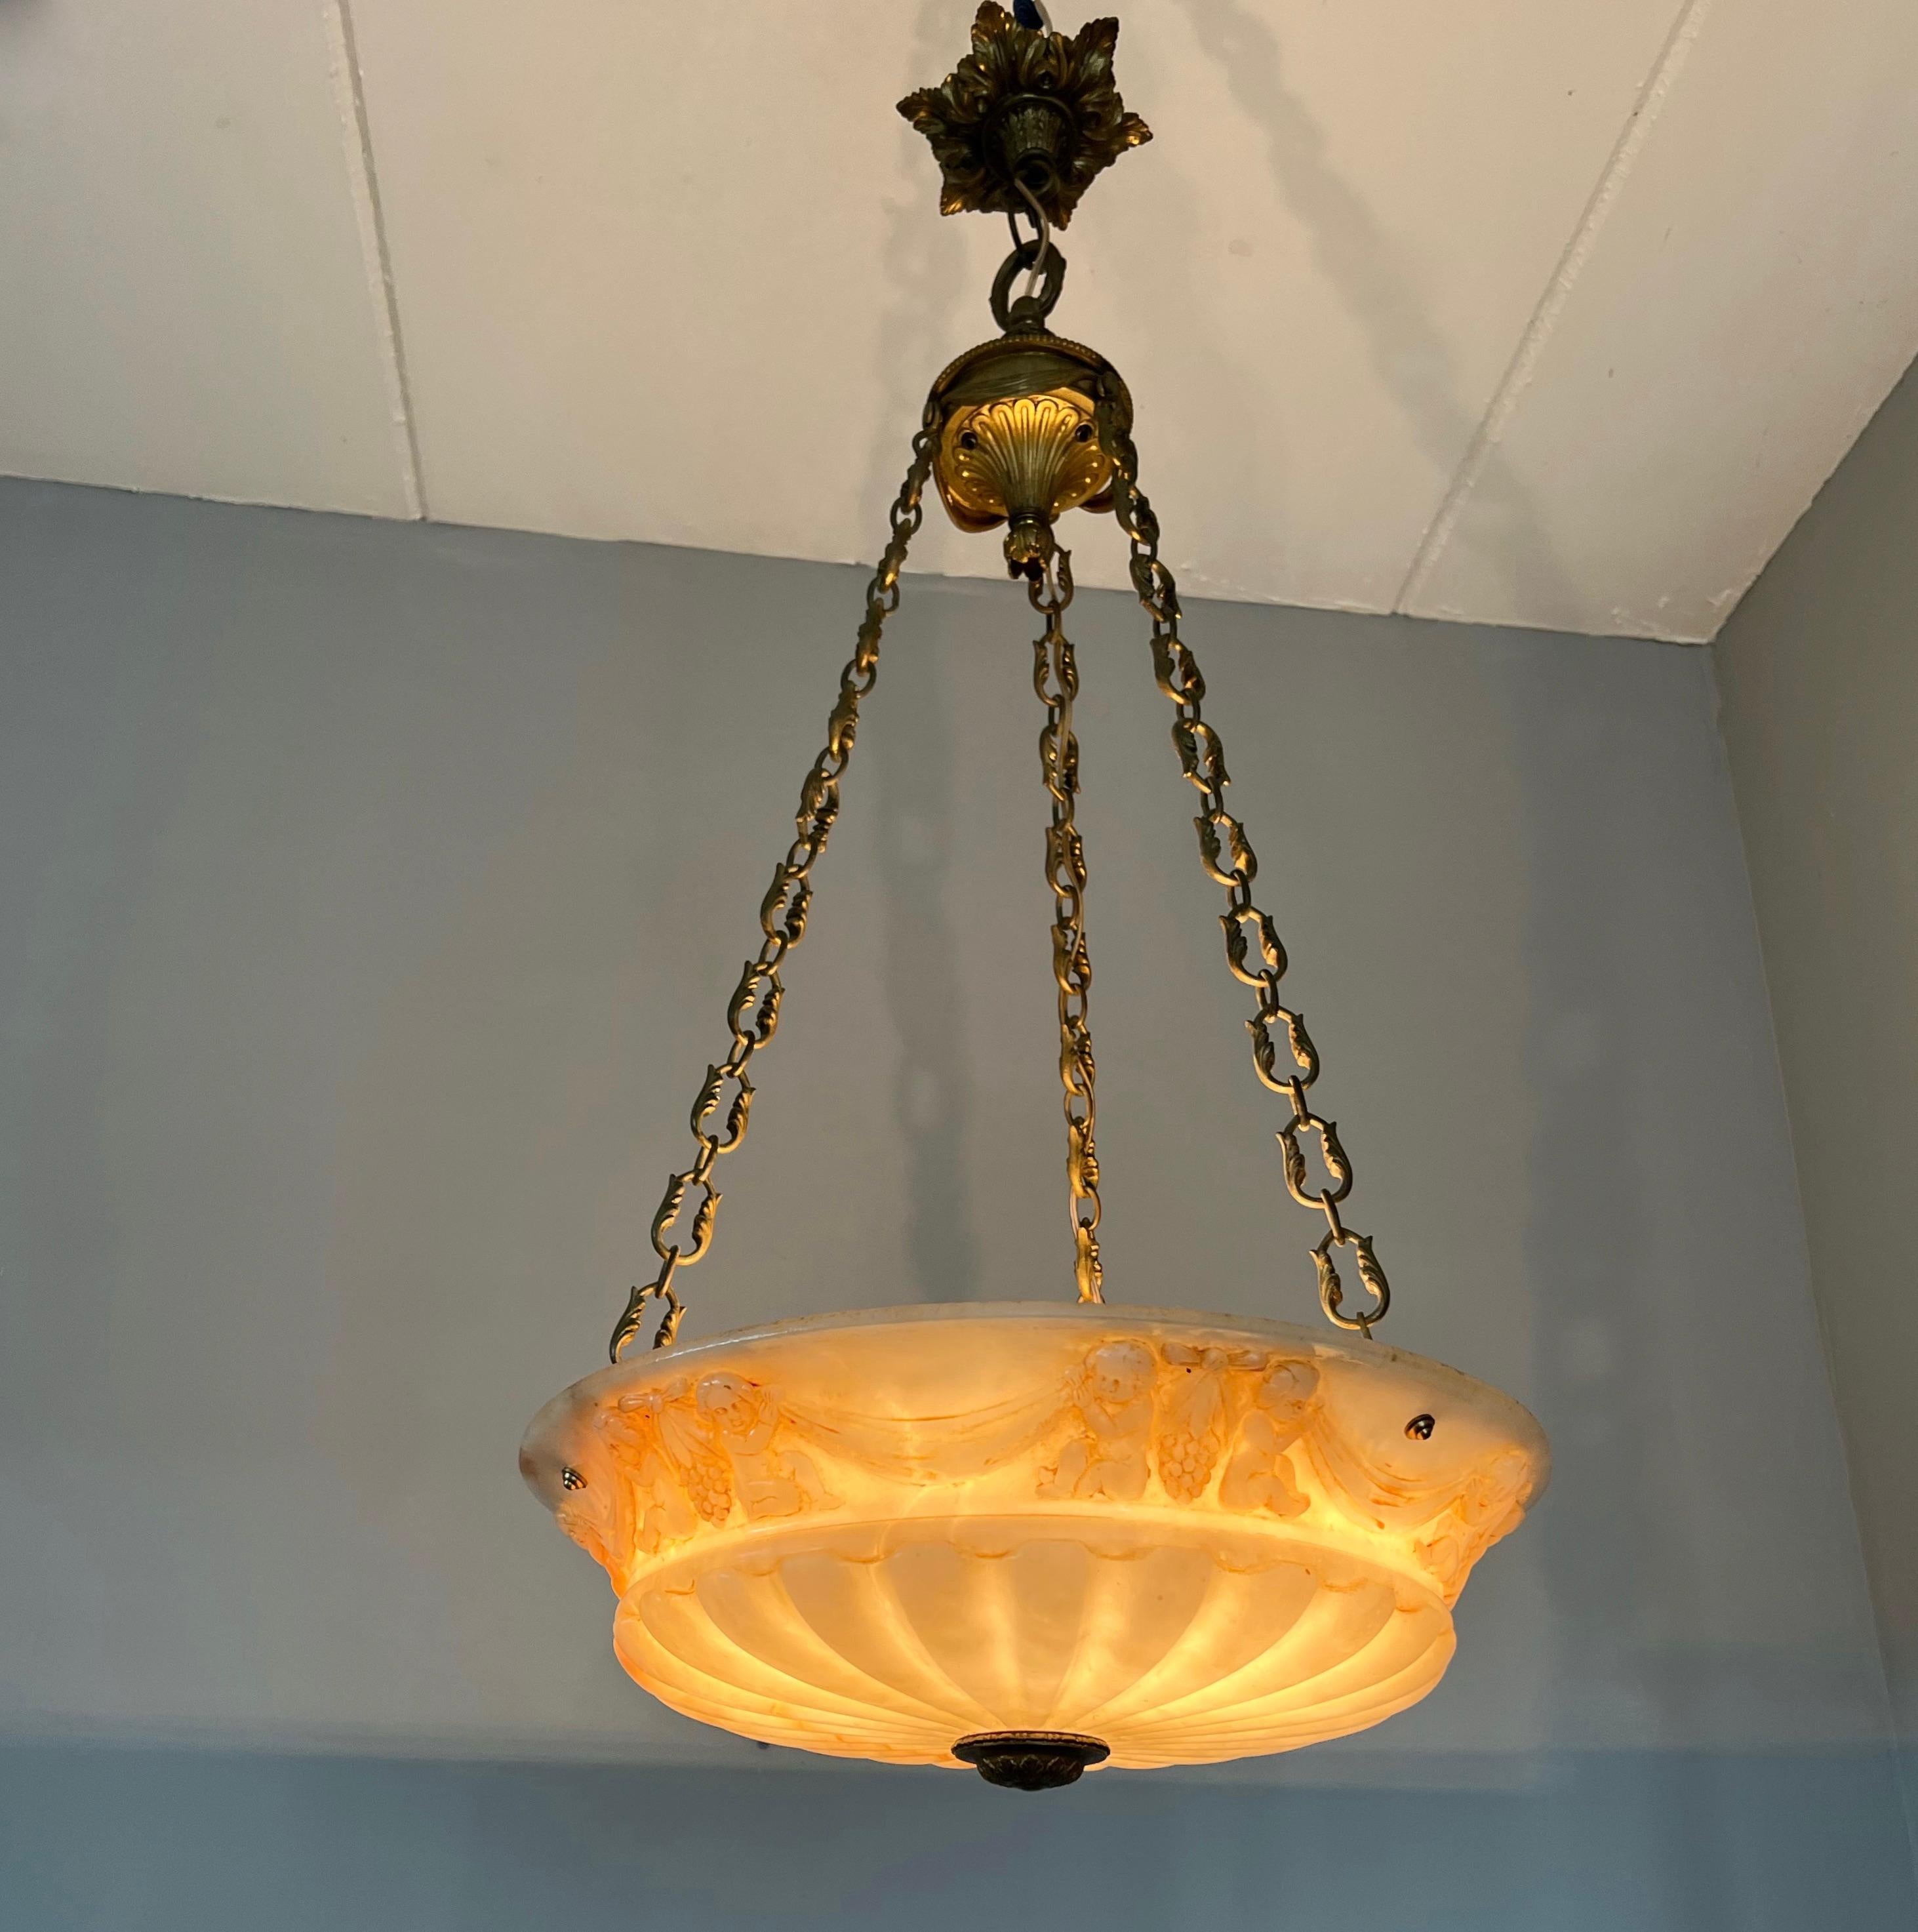 Large early 1900s handcrafted, natural mineral stone with bronze hardware light fixture.

It is difficult to understand how they created such a perfect, circular shape pendant out of one solid alabaster rock and also make such fine carvings in